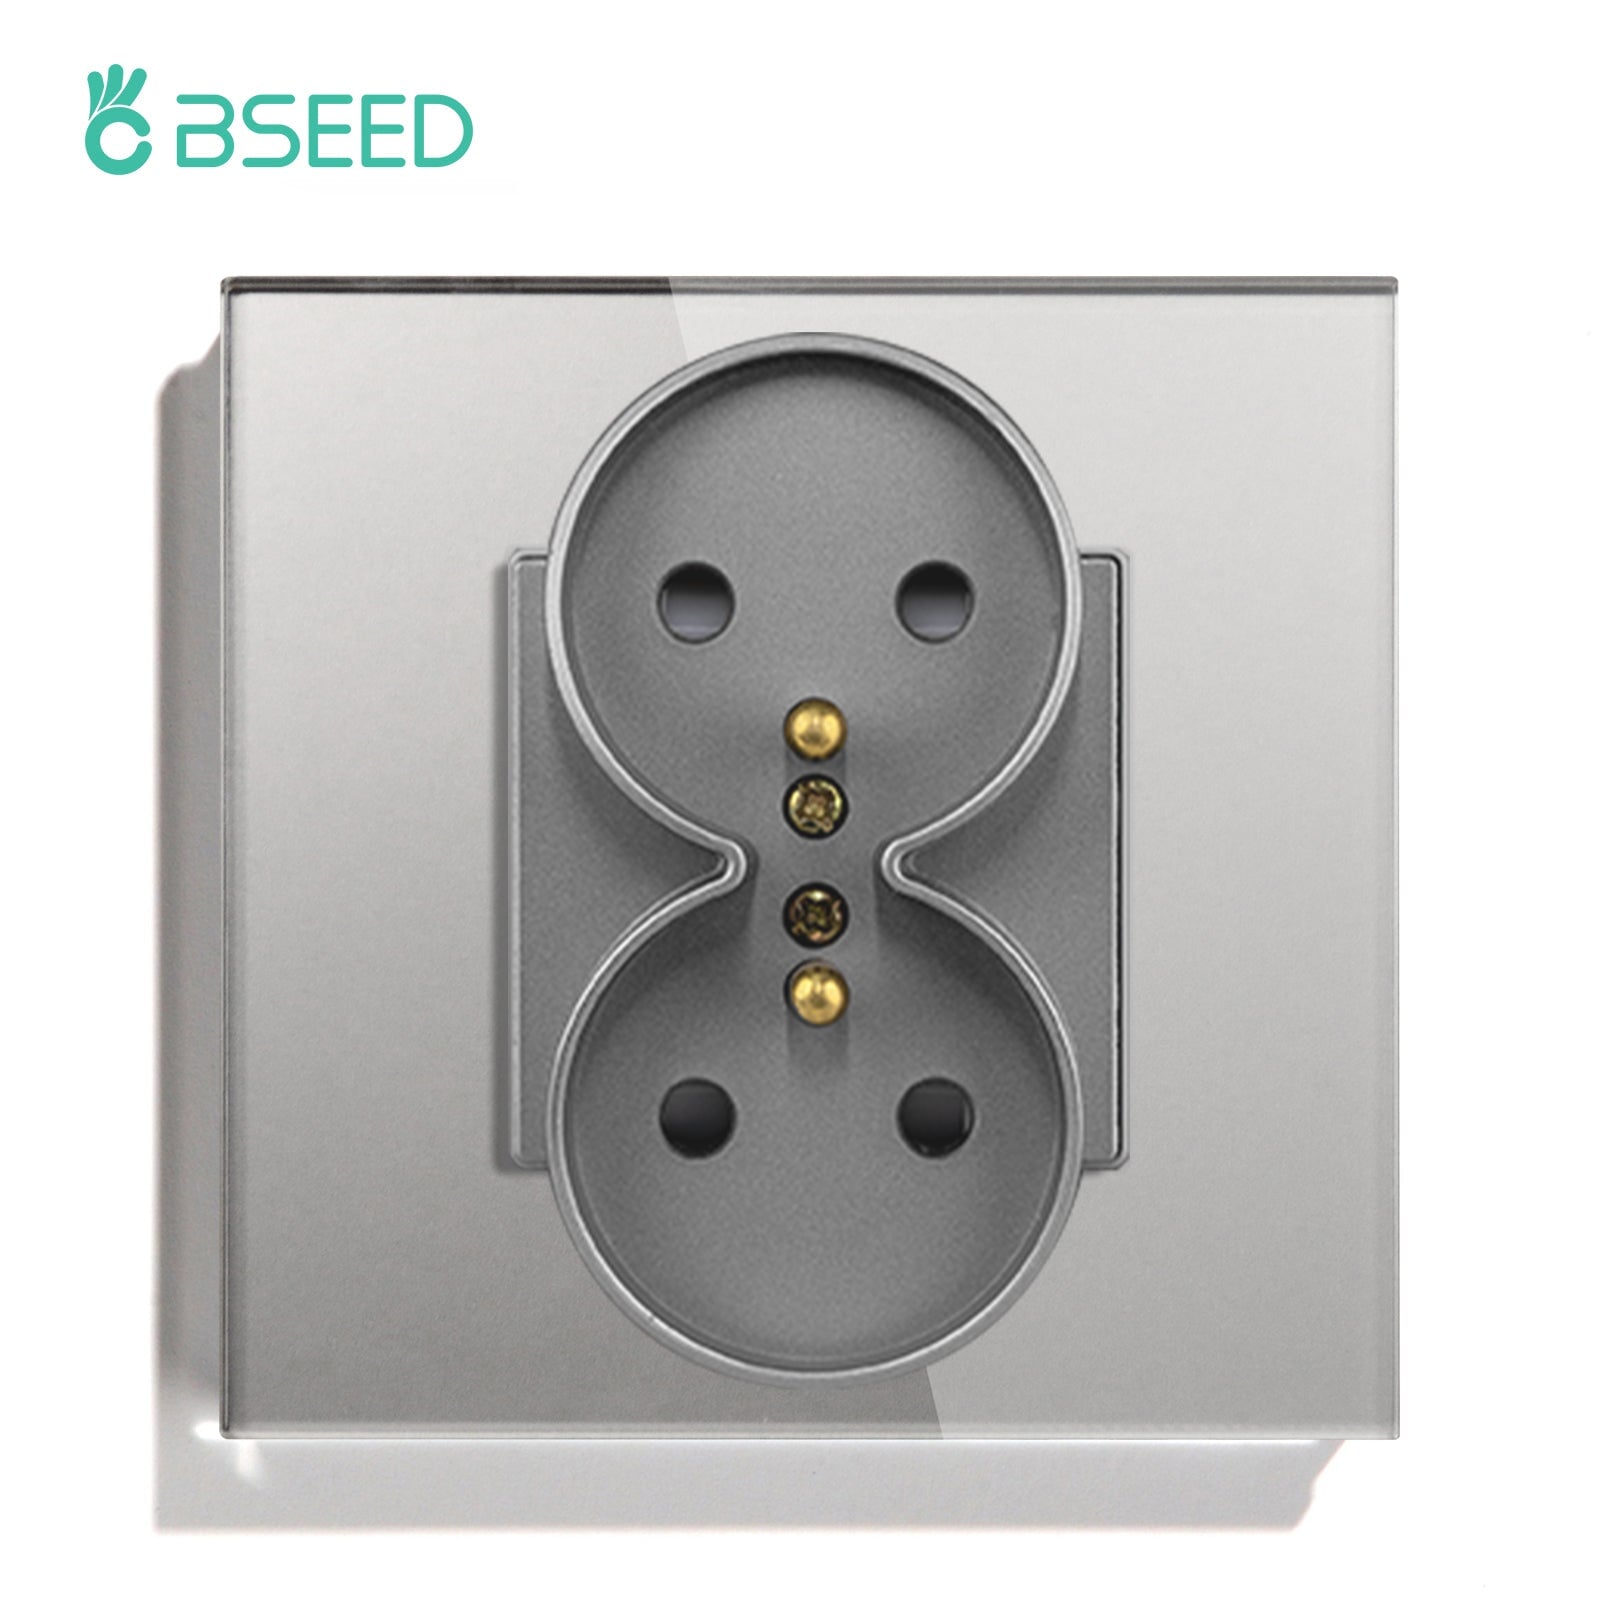 BSEED France Sockets Power Wall Outlet Home Wall Power Sockets Glass Panel Power Outlets & Sockets Bseedswitch Grey 